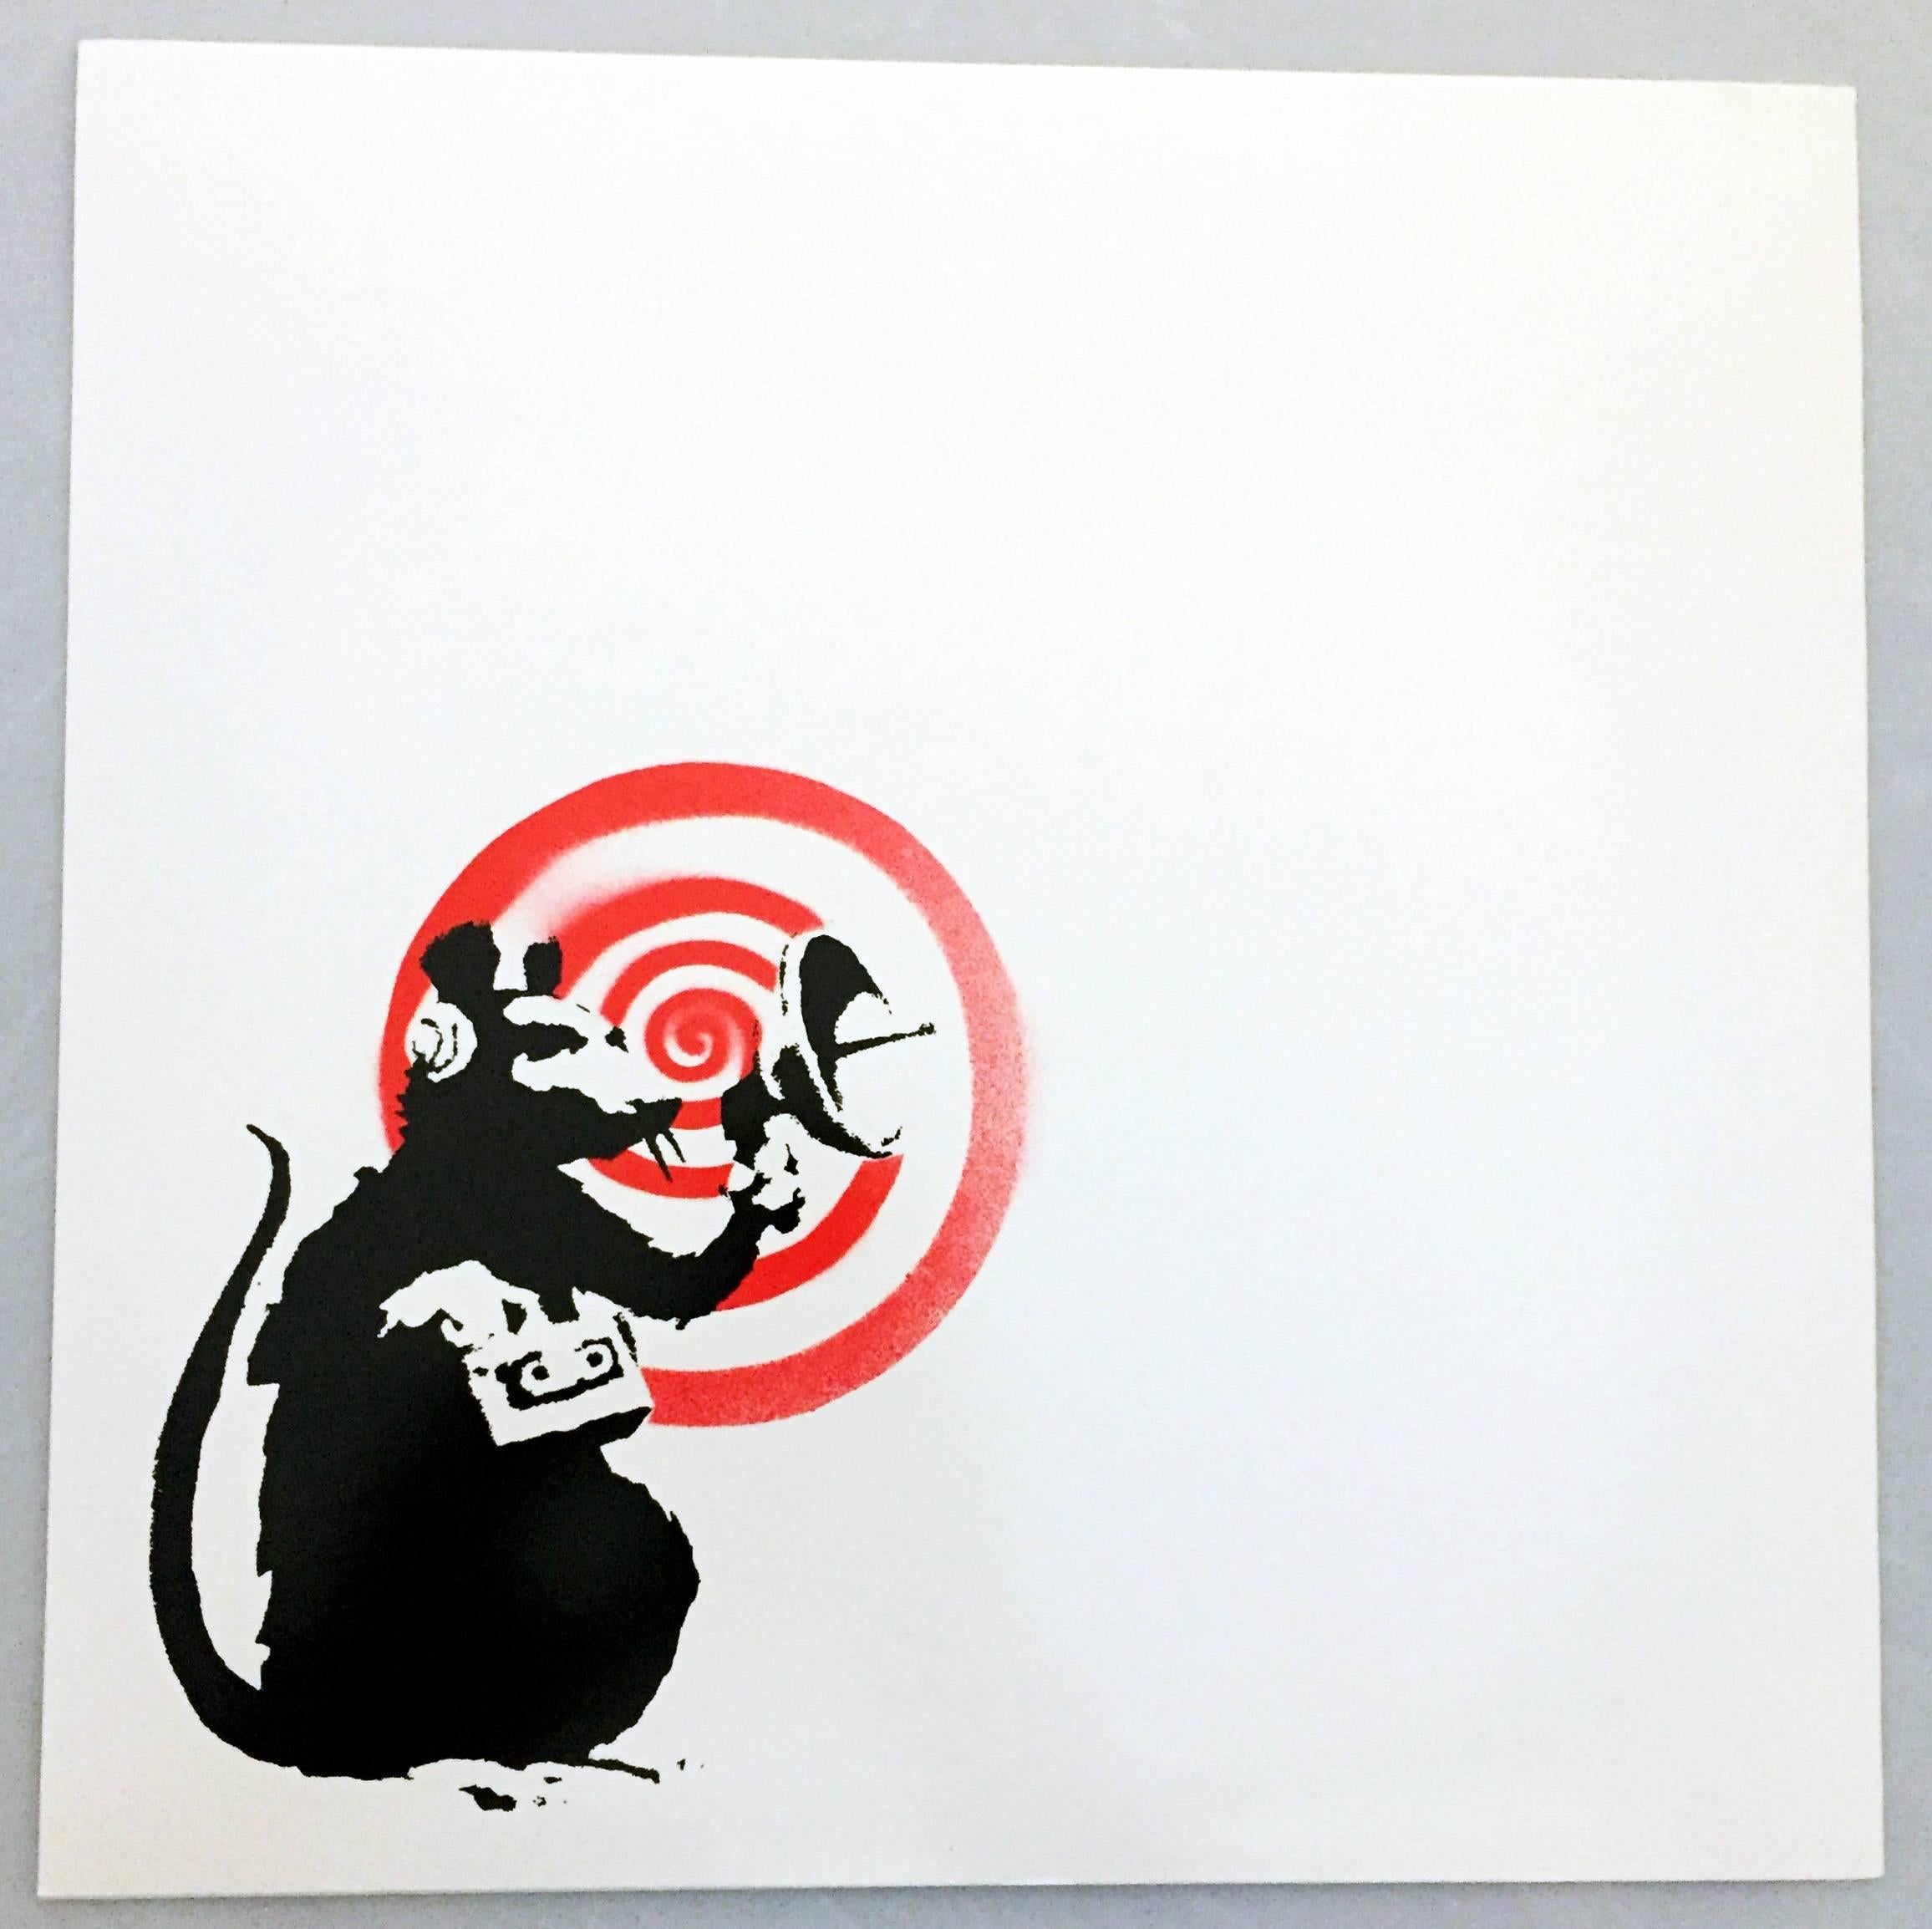 Banksy produced this cover &amp; record label art for his friends Dirty Funker in 2008. Featured here is Banksy's world renown Radar Rat

Silkscreen on Record Sleeve and Vinyl Record; 2008
Color: Red &amp; White
Dimensions: 12 x12 in (30 x 30